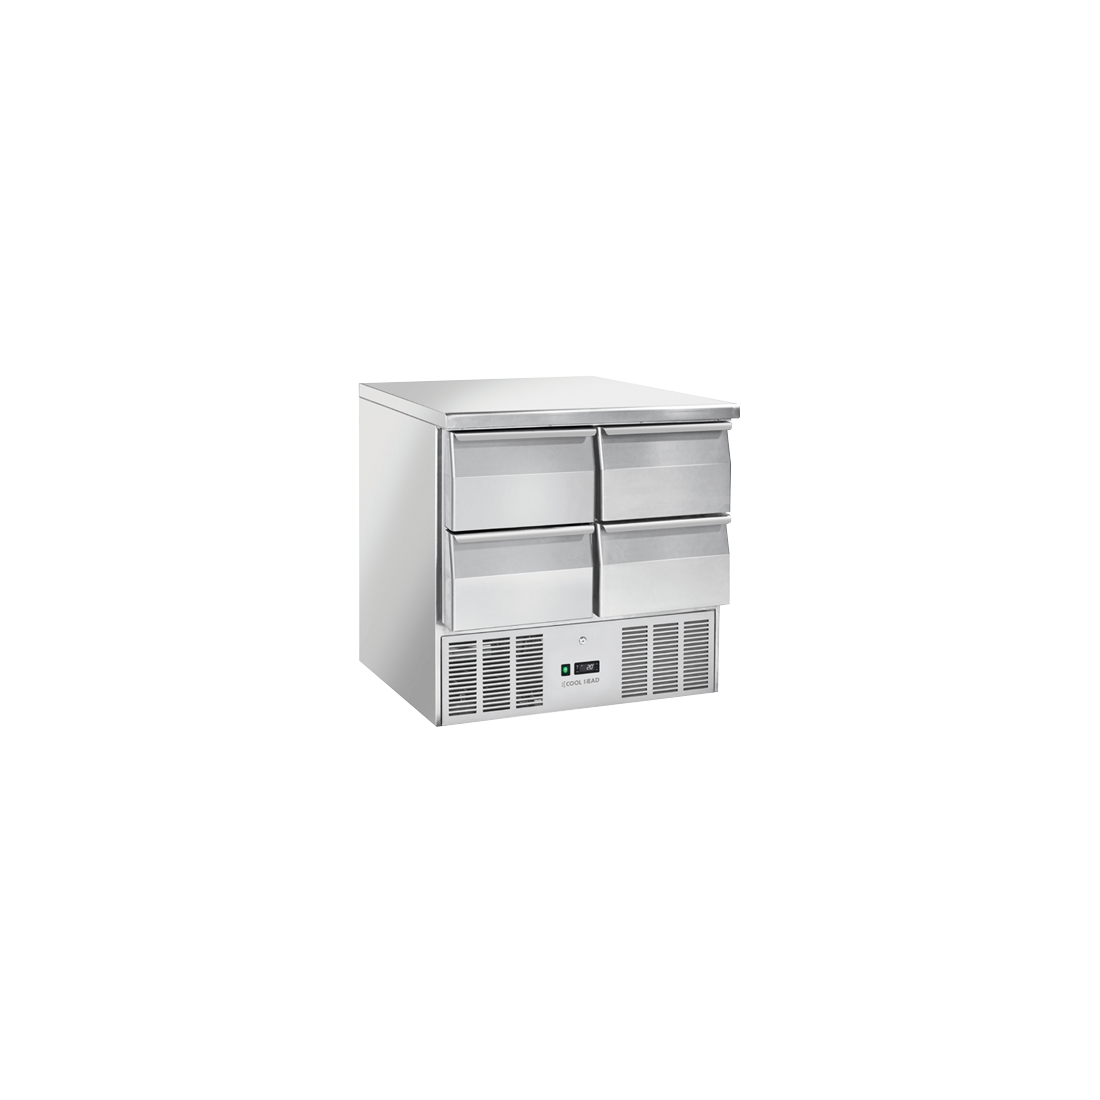 COOL HEAD ,CRD94, Refrigerated Preparation Saladette with 4 Drawers|mkayn|مكاين